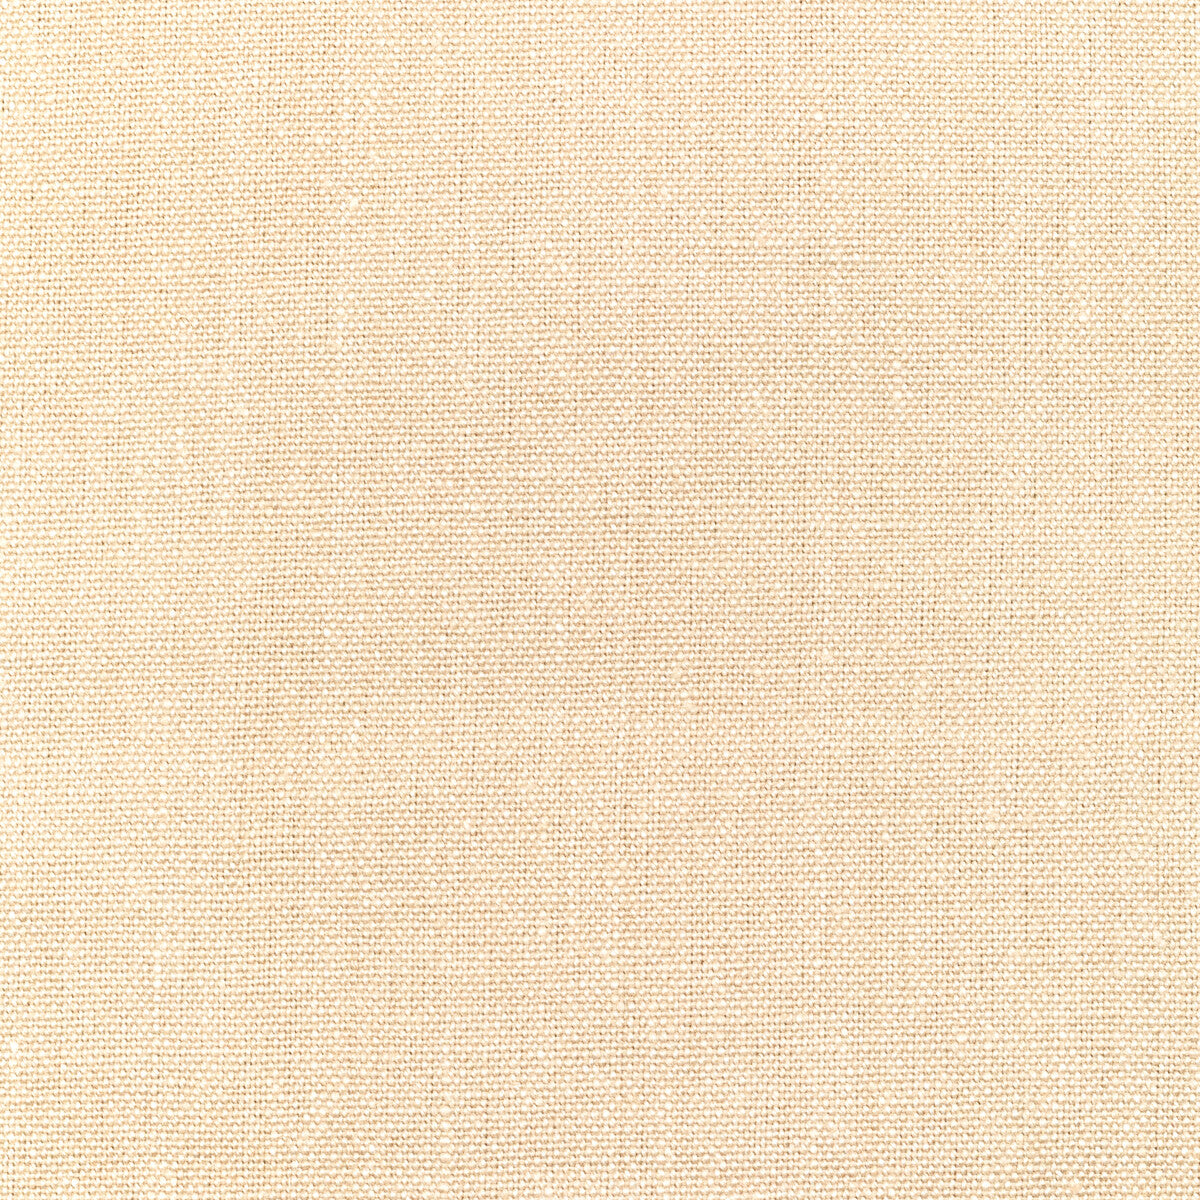 Watermill fabric in natural color - pattern 30421.111.0 - by Kravet Basics in the Perfect Plains collection